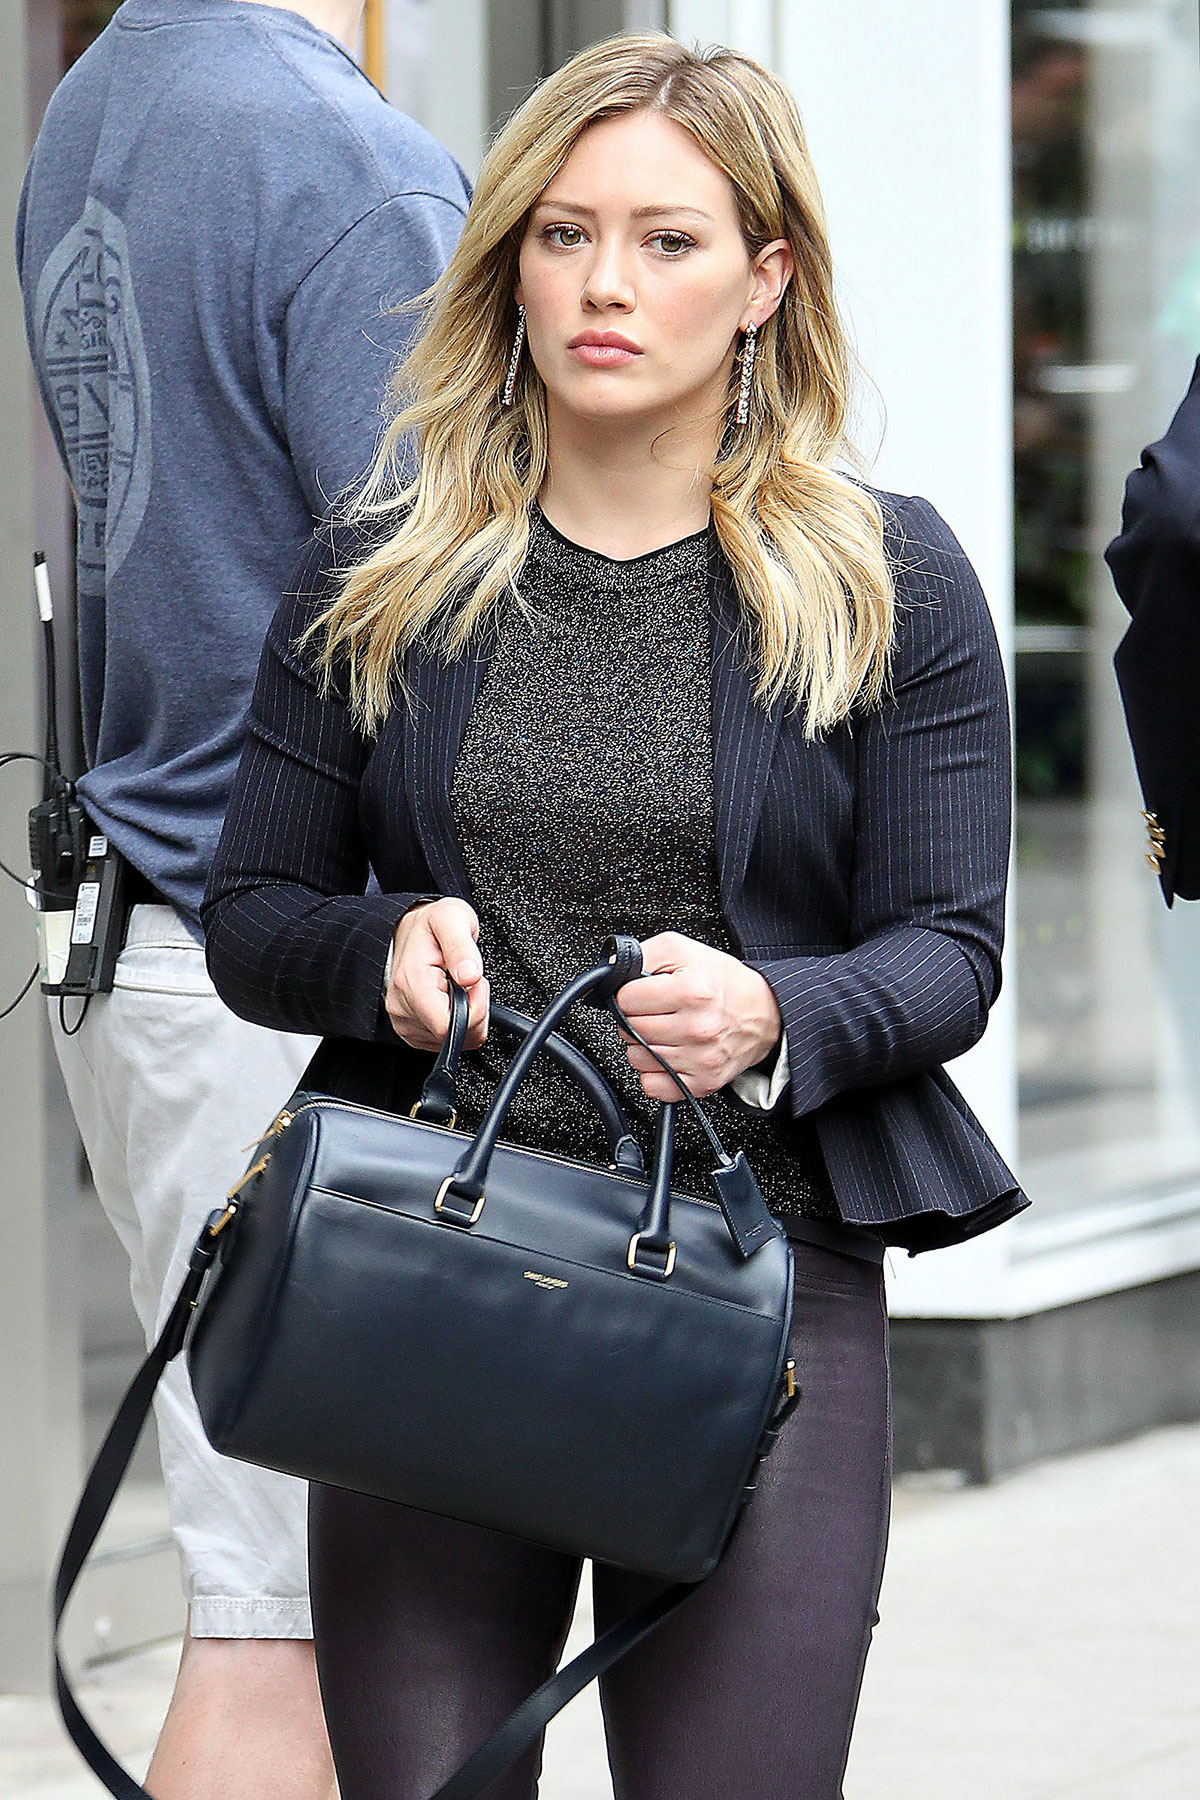 Hilary Duff was spotted on the set of Younger in New York City